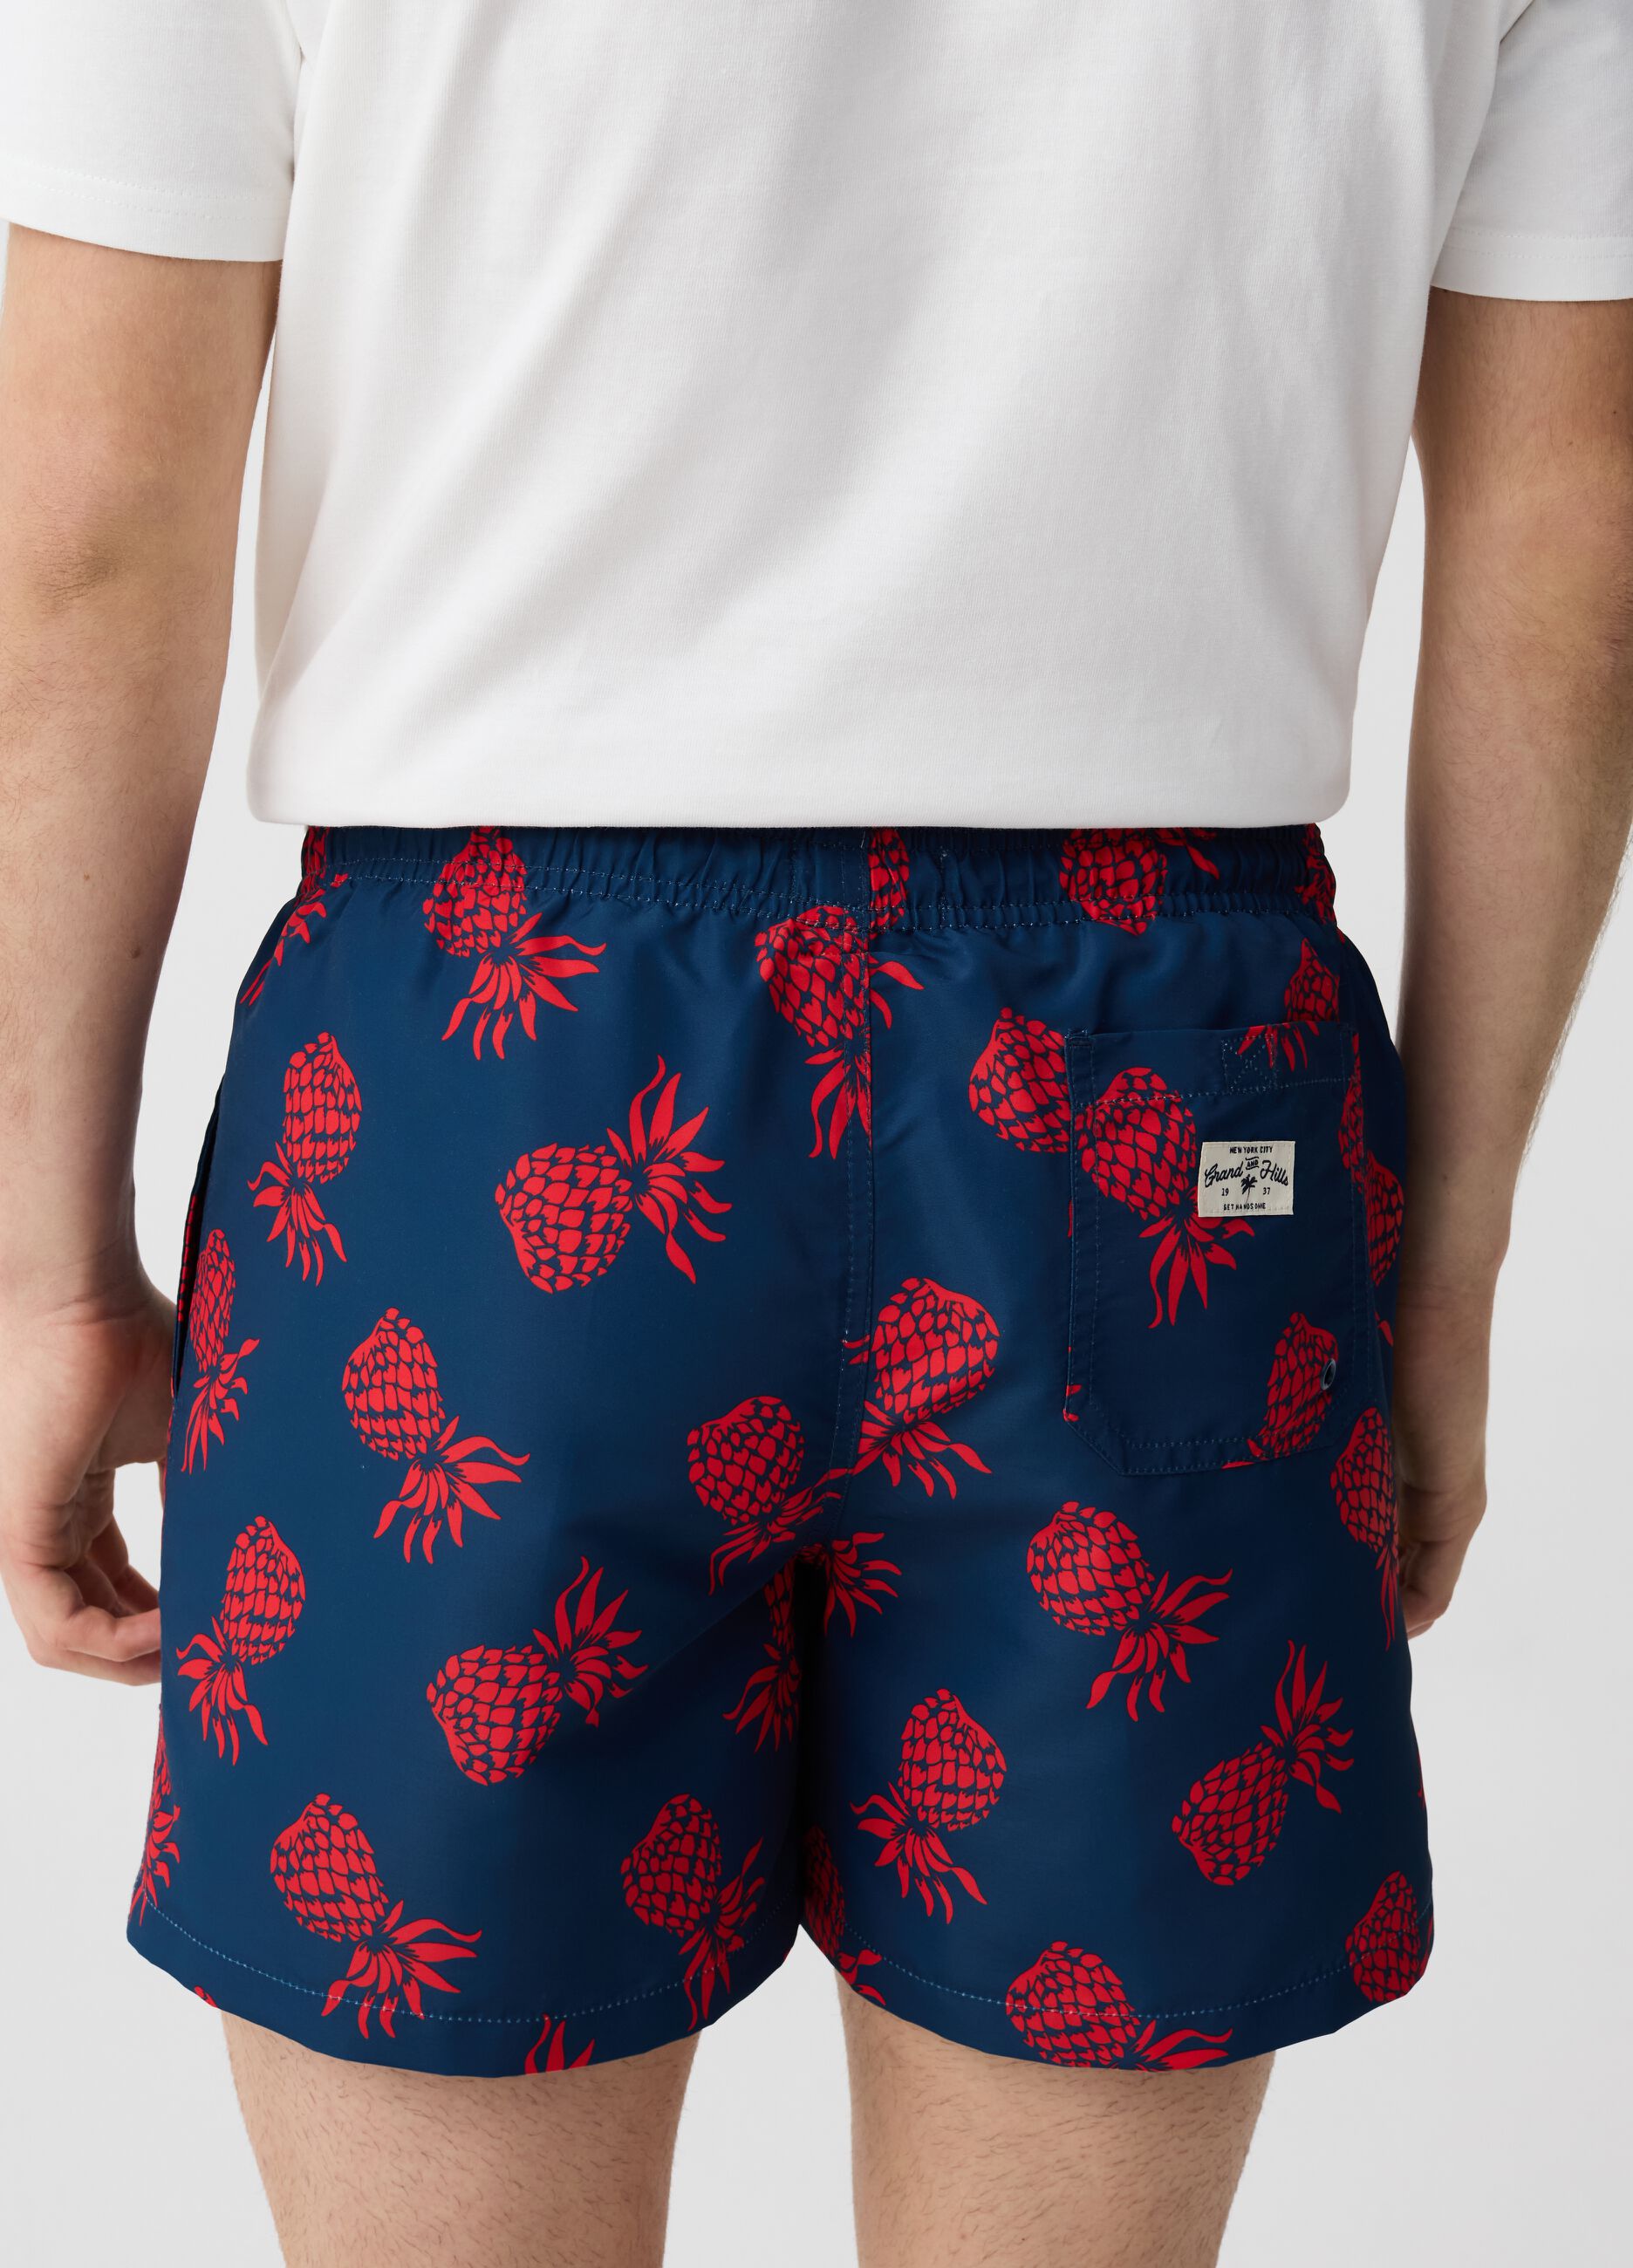 Swimming trunks with pineapples print